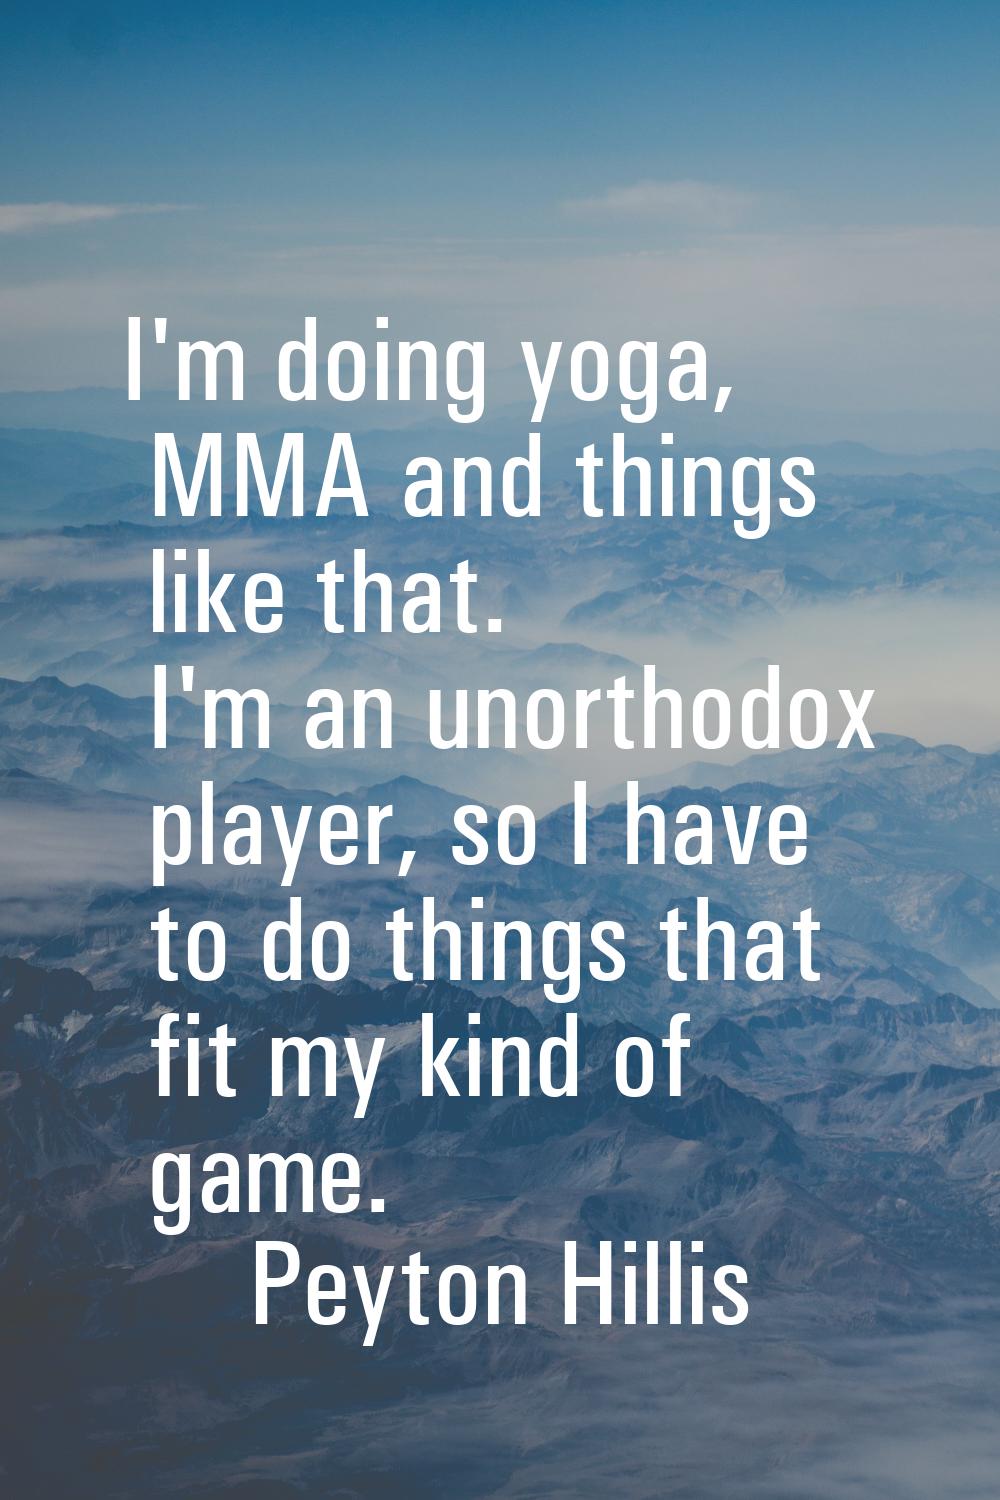 I'm doing yoga, MMA and things like that. I'm an unorthodox player, so I have to do things that fit